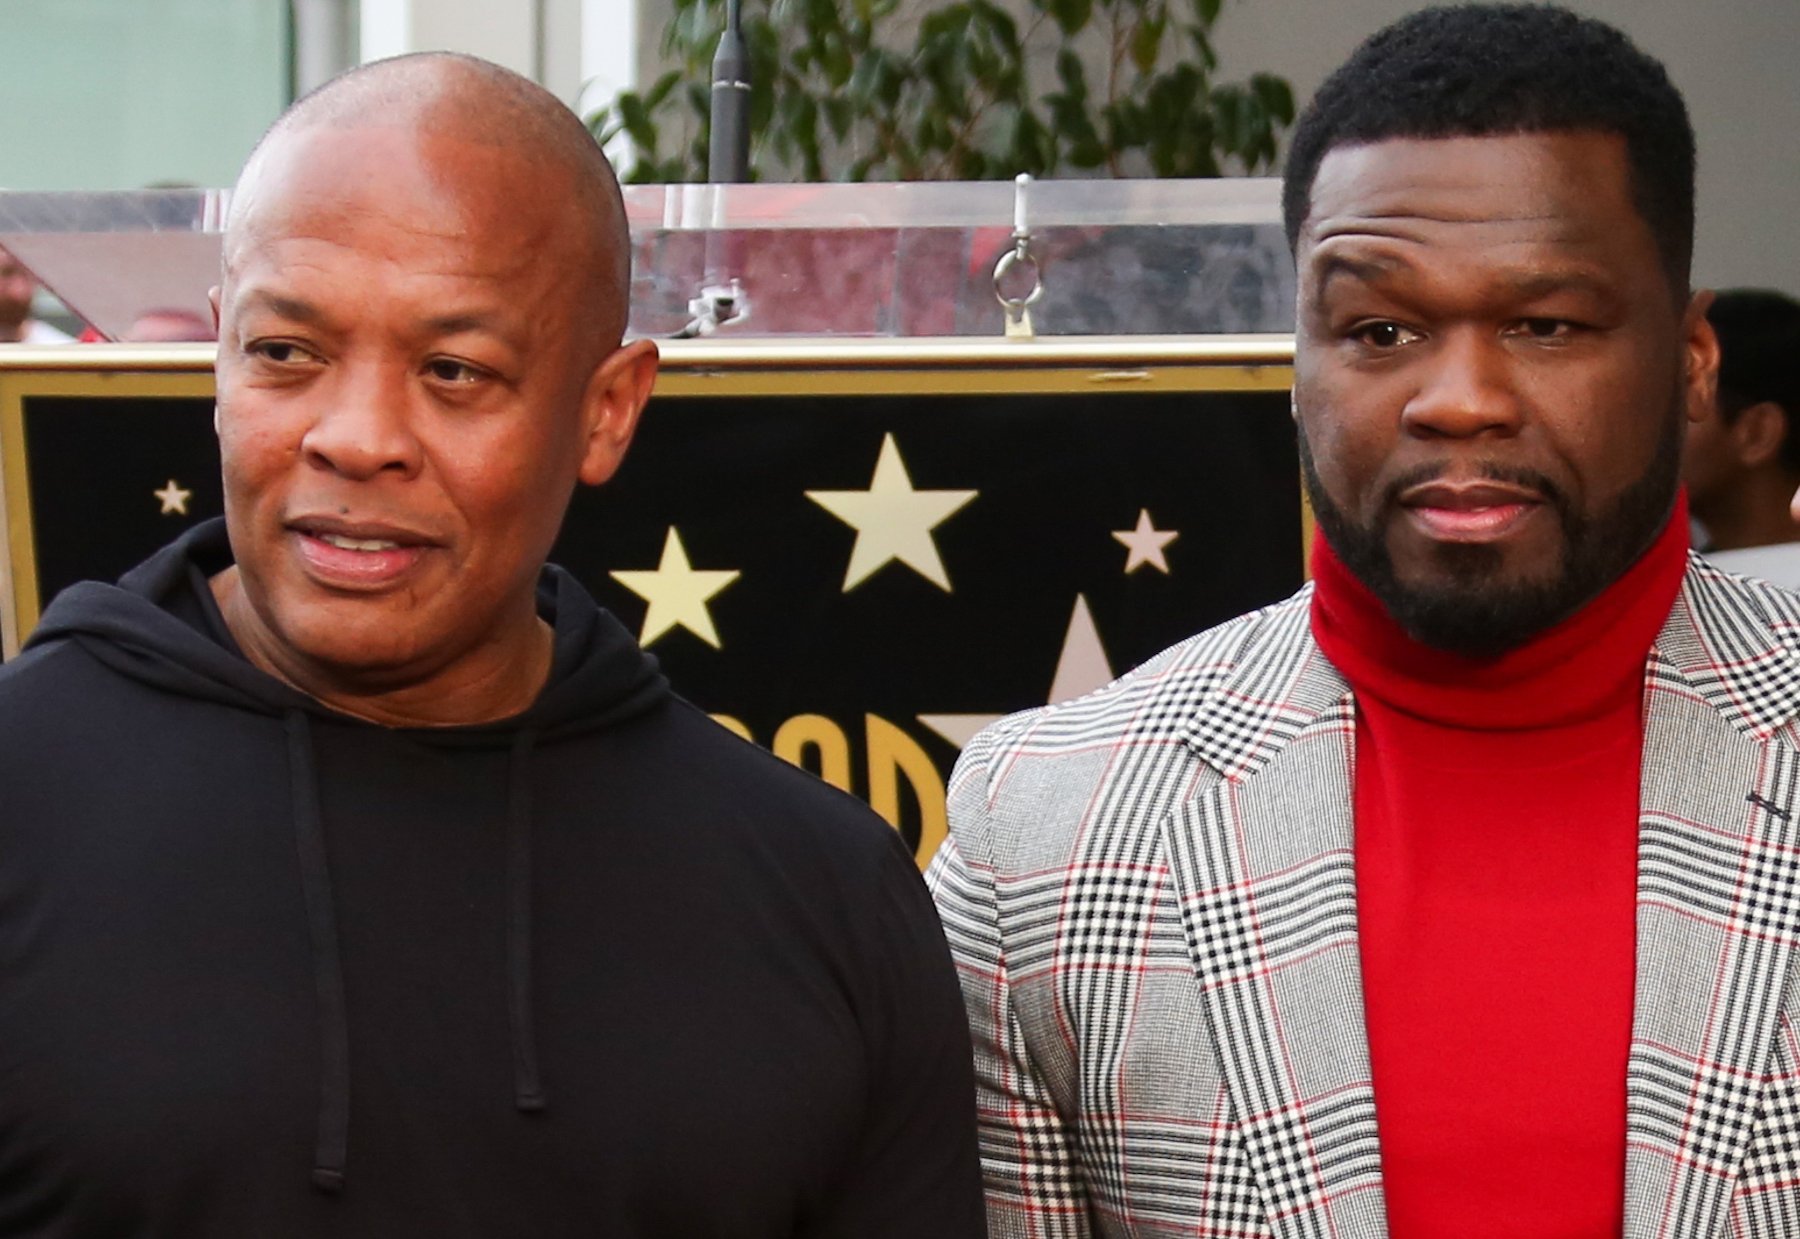 Dr. Dre and Curtis "50 Cent" Jackson posing for a photo together